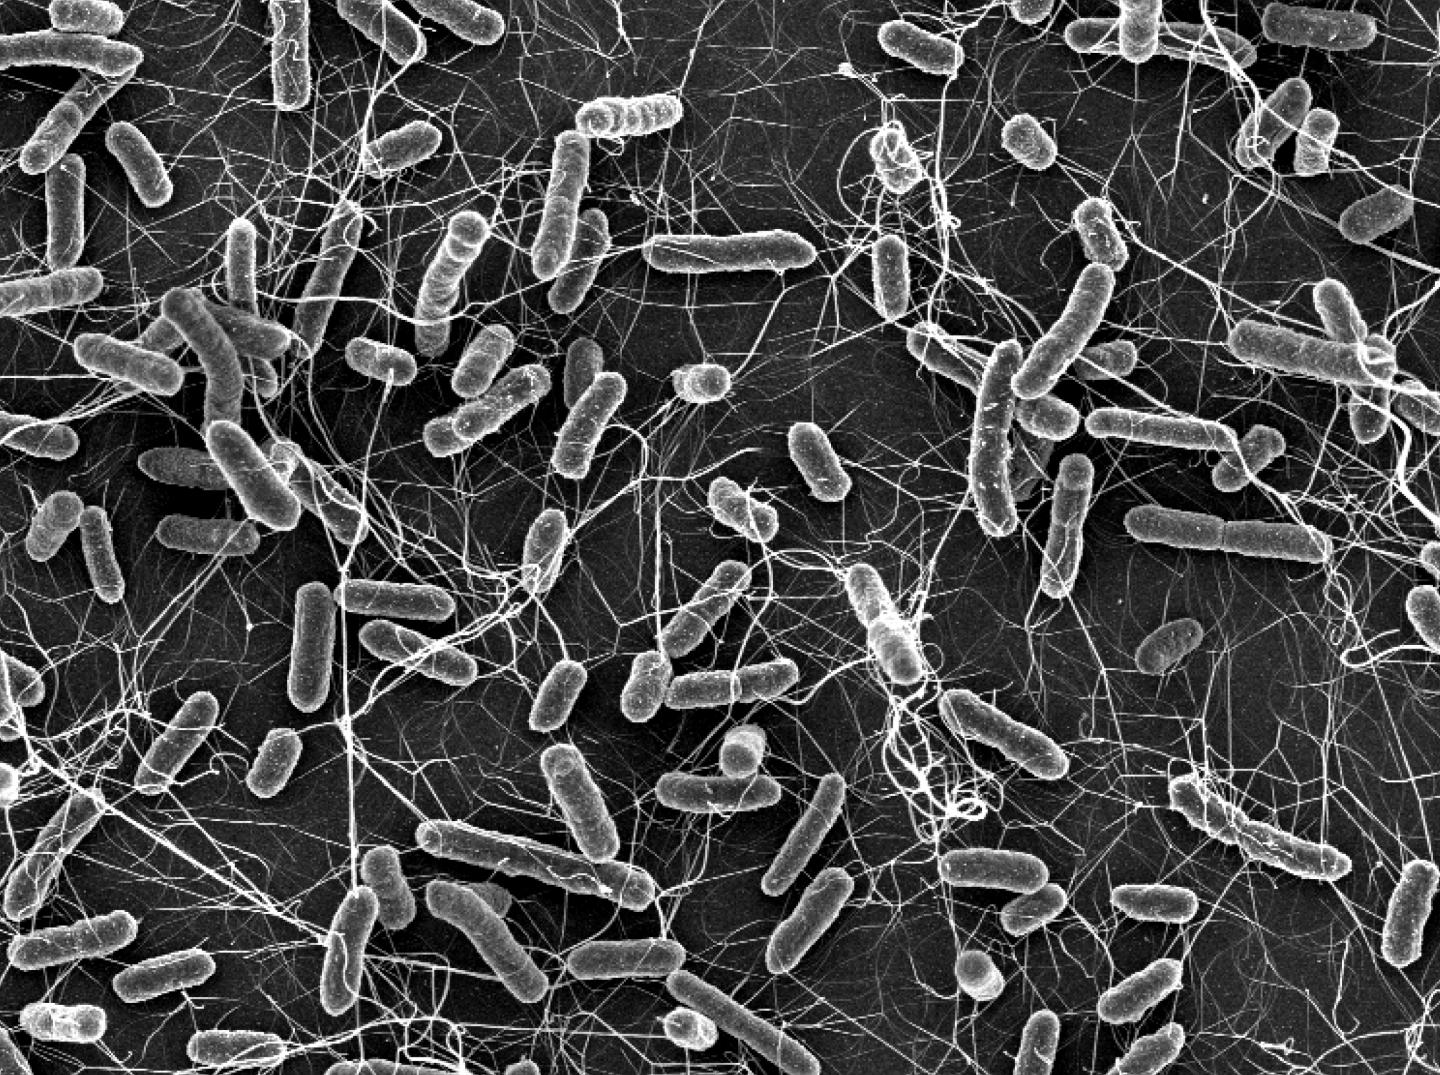 Salmonella causes diarrhea in animals and humans. These bacteria become a particular public health concern if they are resistant to antibiotics (electron microscopic photograph). Source: ETH Zurich / Stefan Fattinger